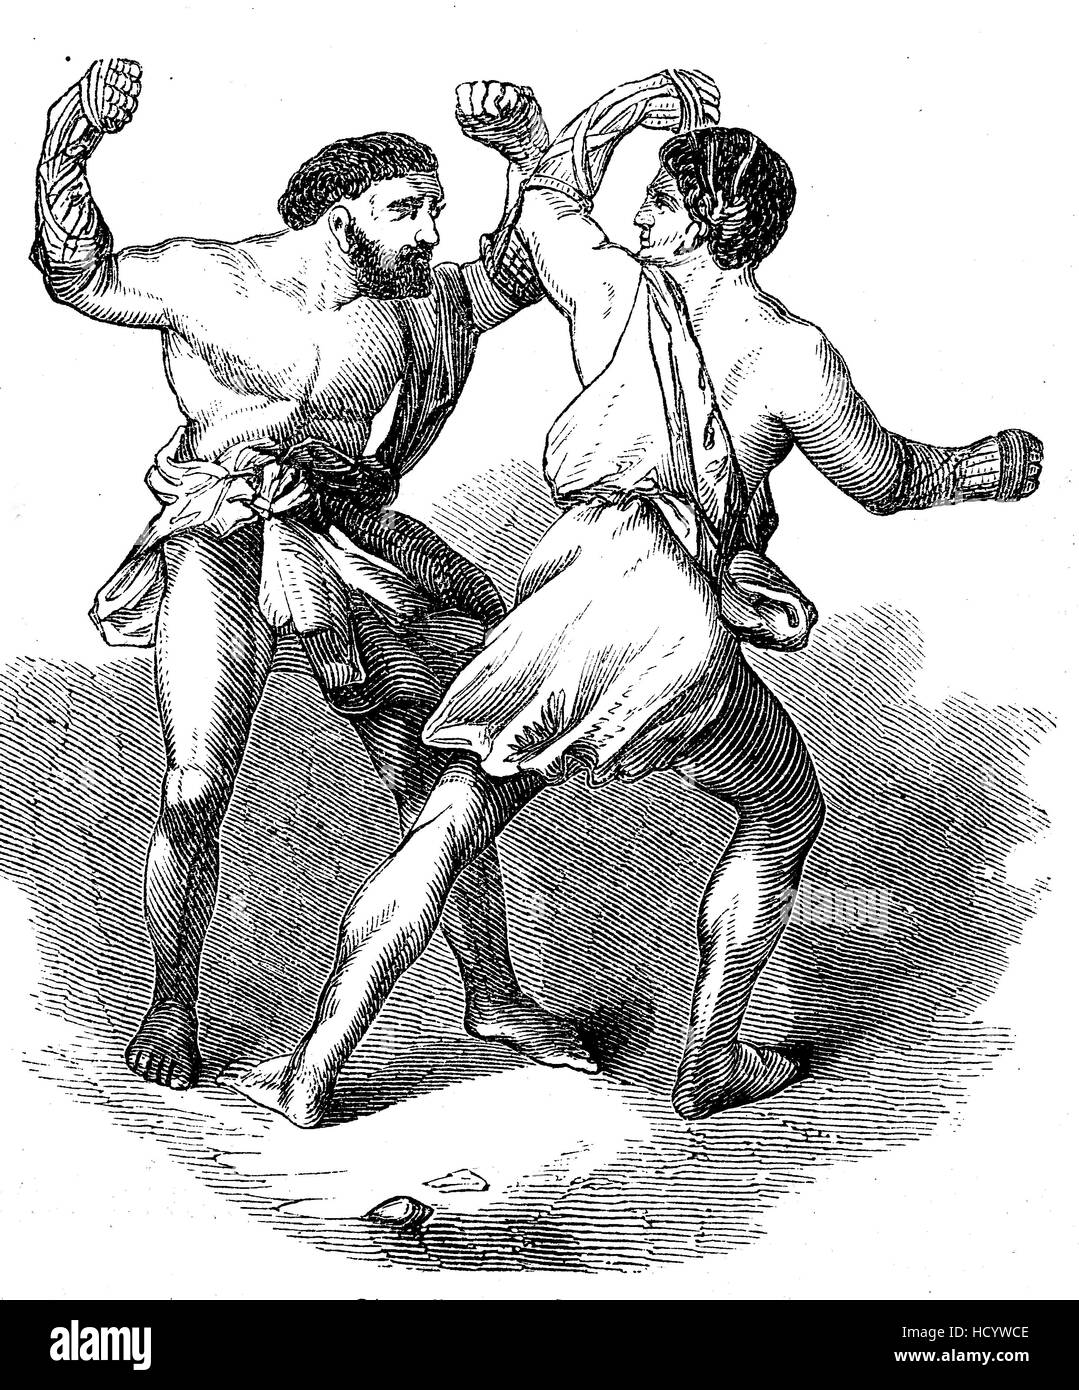 Pugilists, gladiators in ancient Rome, the story of the ancient Rome, roman Empire, Italy Stock Photo